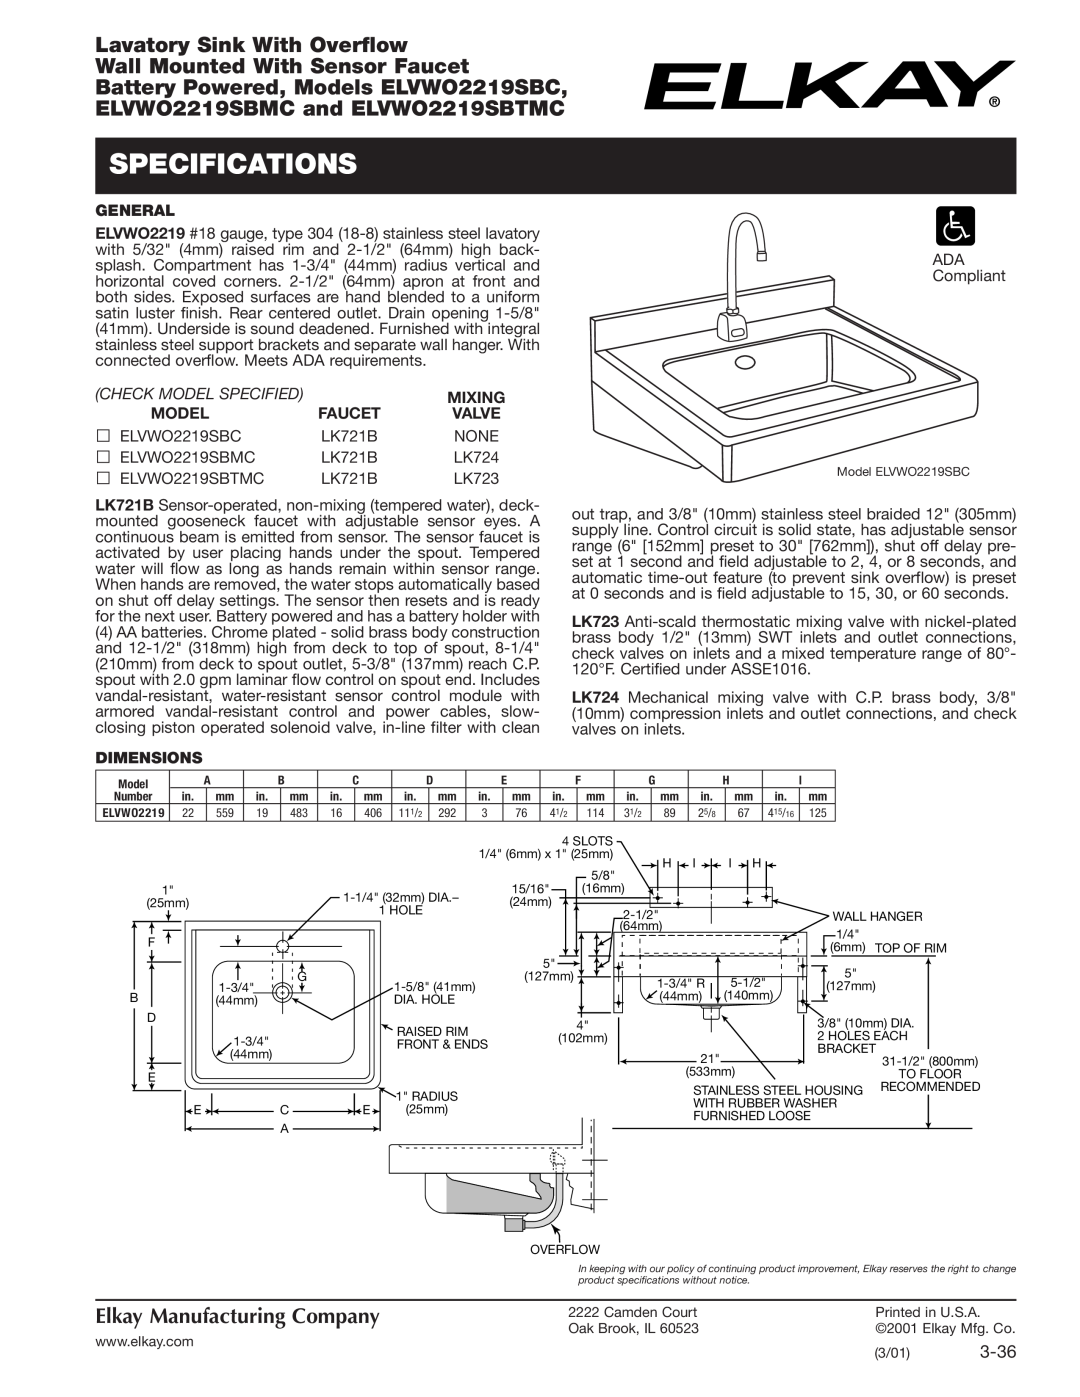 Elkay ELVWO2219SBMC specifications Specifications, Lavatory Sink With Overflow, Wall Mounted With Sensor Faucet, 3-36 